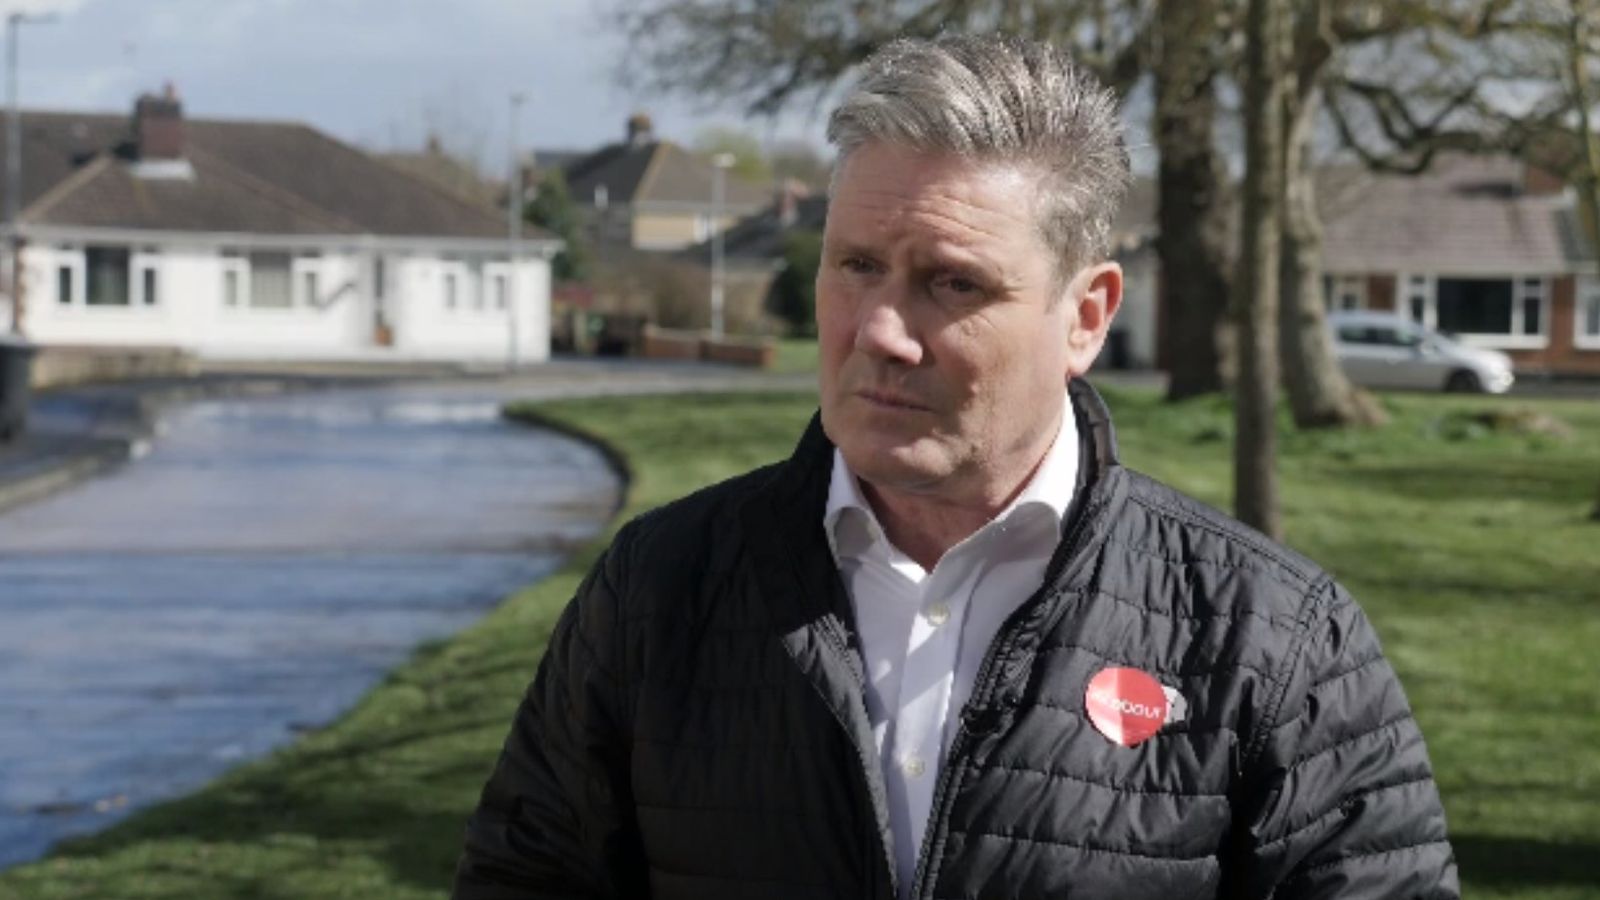 Sir Keir Starmer 'prepared to be ruthless' to win election - especially when it comes to Jeremy Corbyn